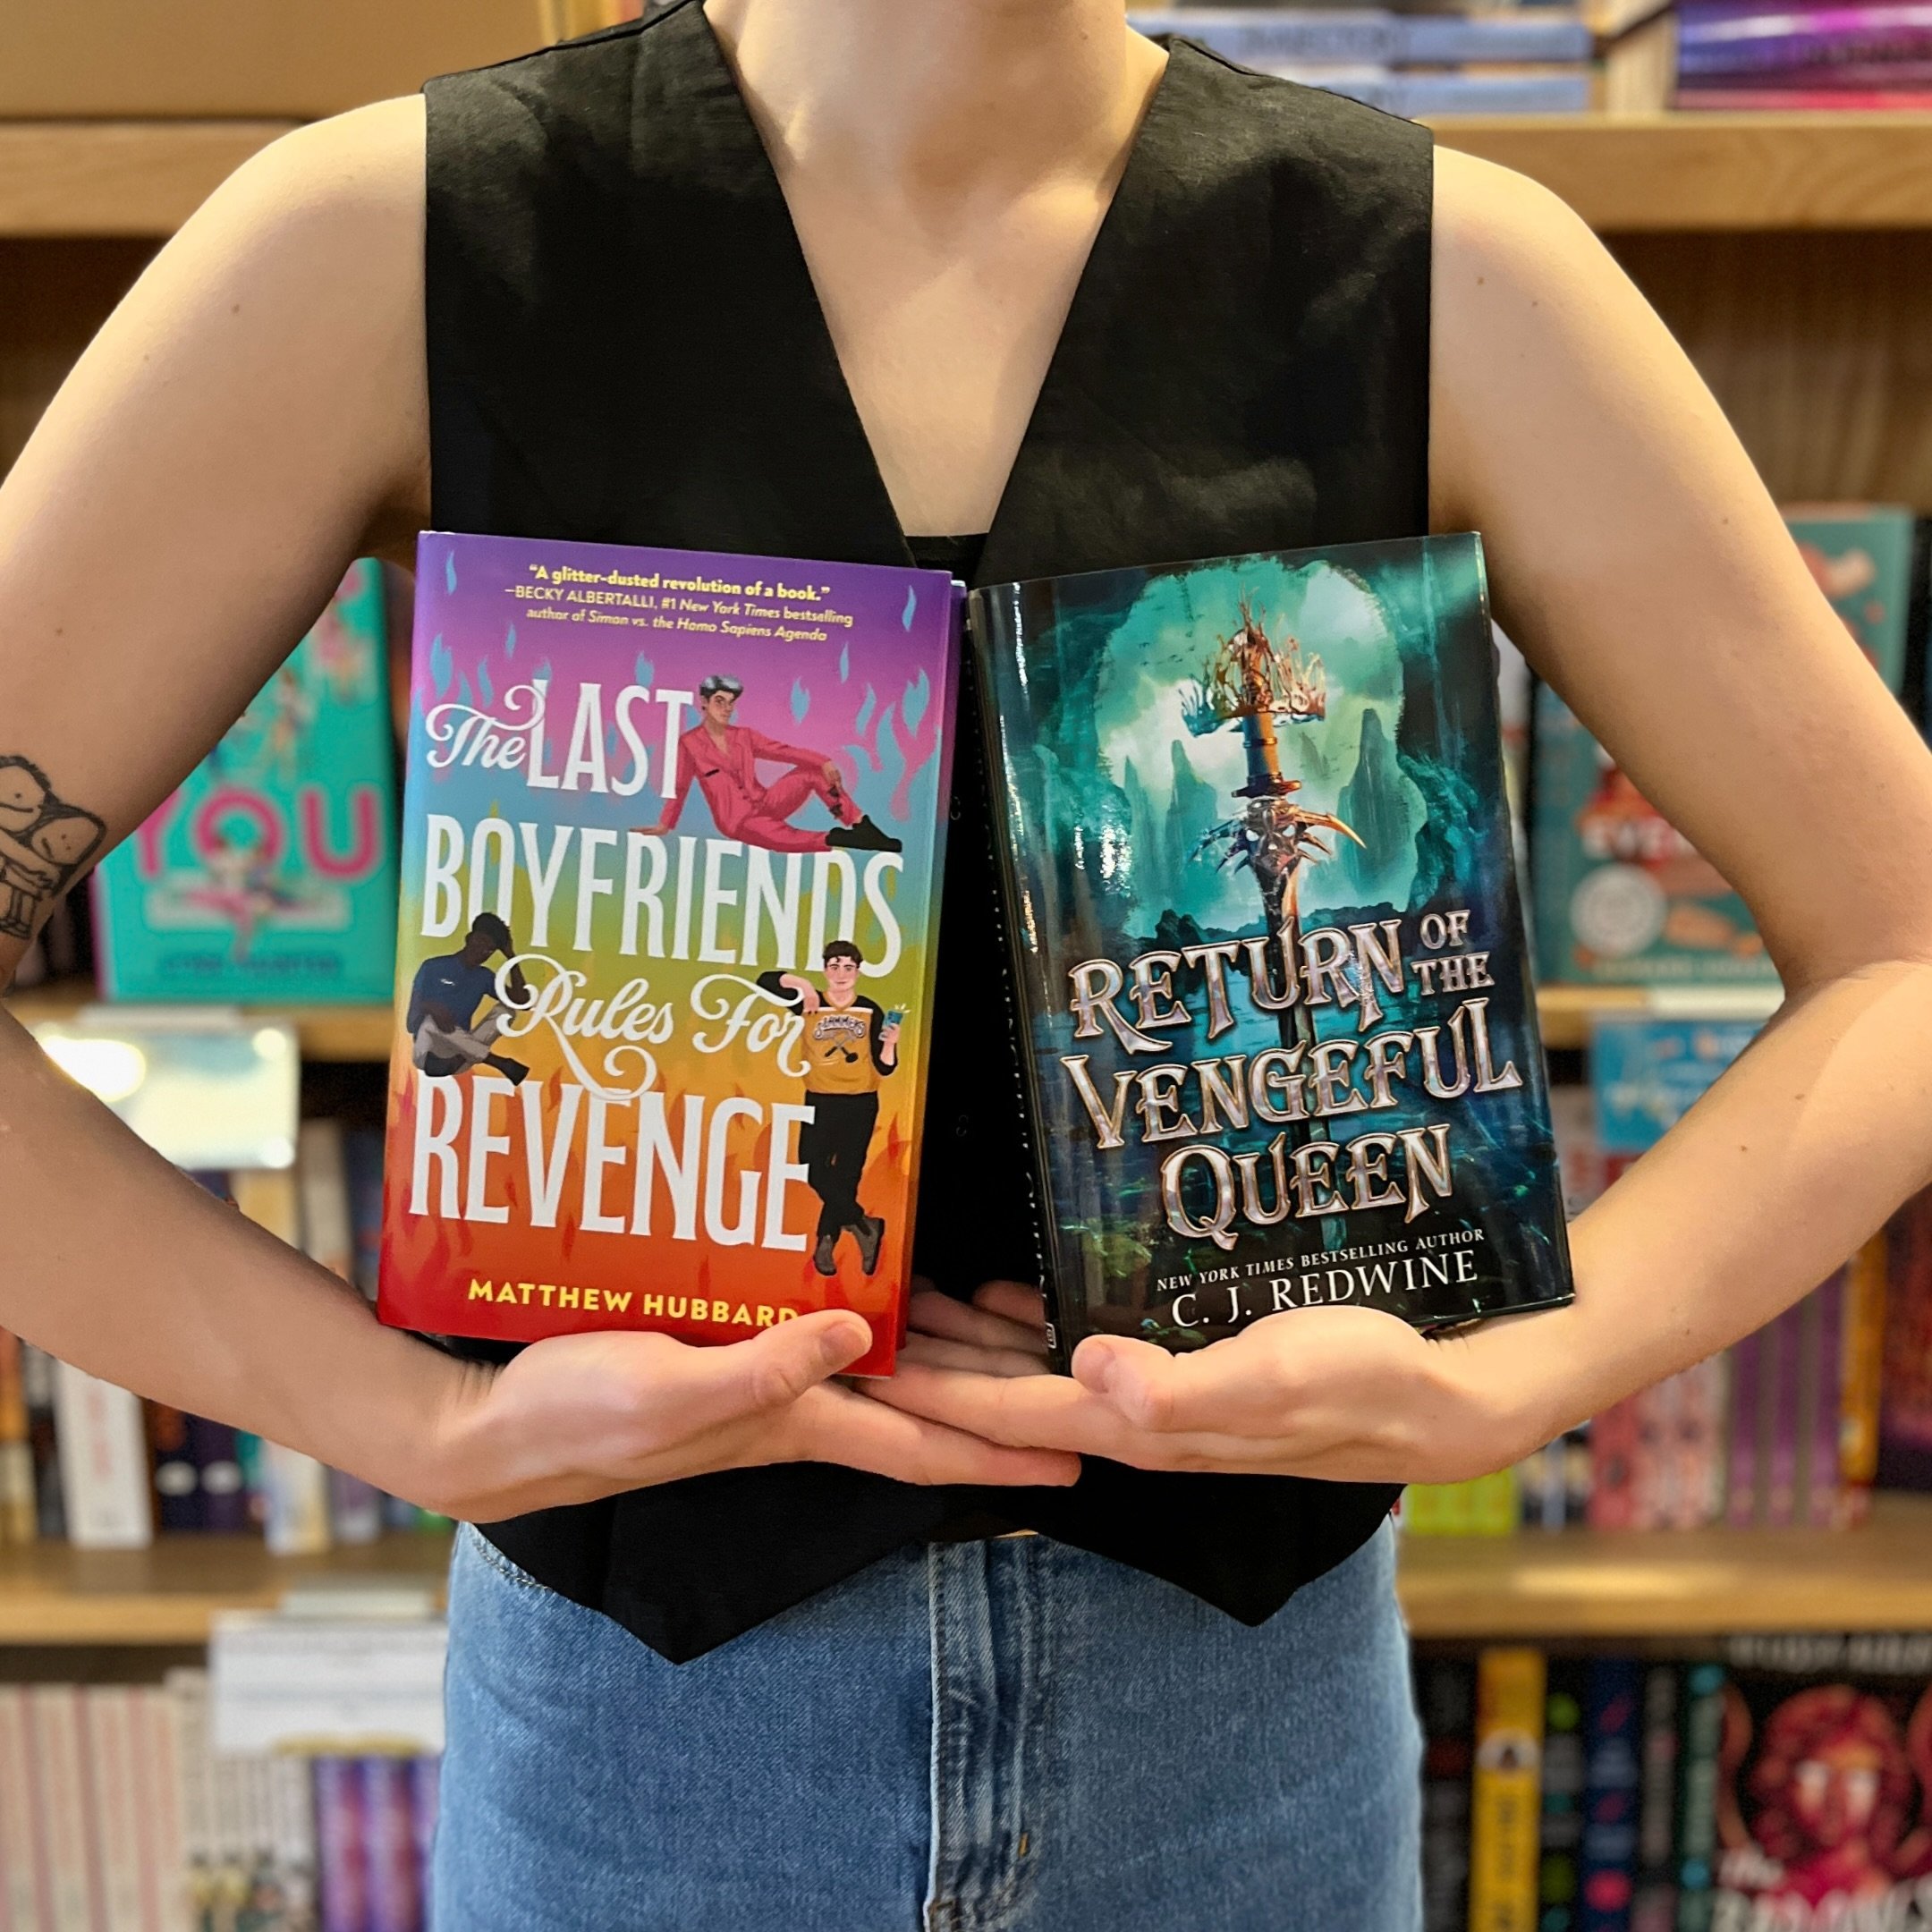 Calling all&hellip;.

1. YA readers!
2. Fans of vengeance! (Who isn&rsquo;t?)
3. Lovers of great stories!

We have two fantastic YA events coming up back-to-back next week, so make your plans to join Matthew Hubbard on May 1st and C.J. Redwine on May